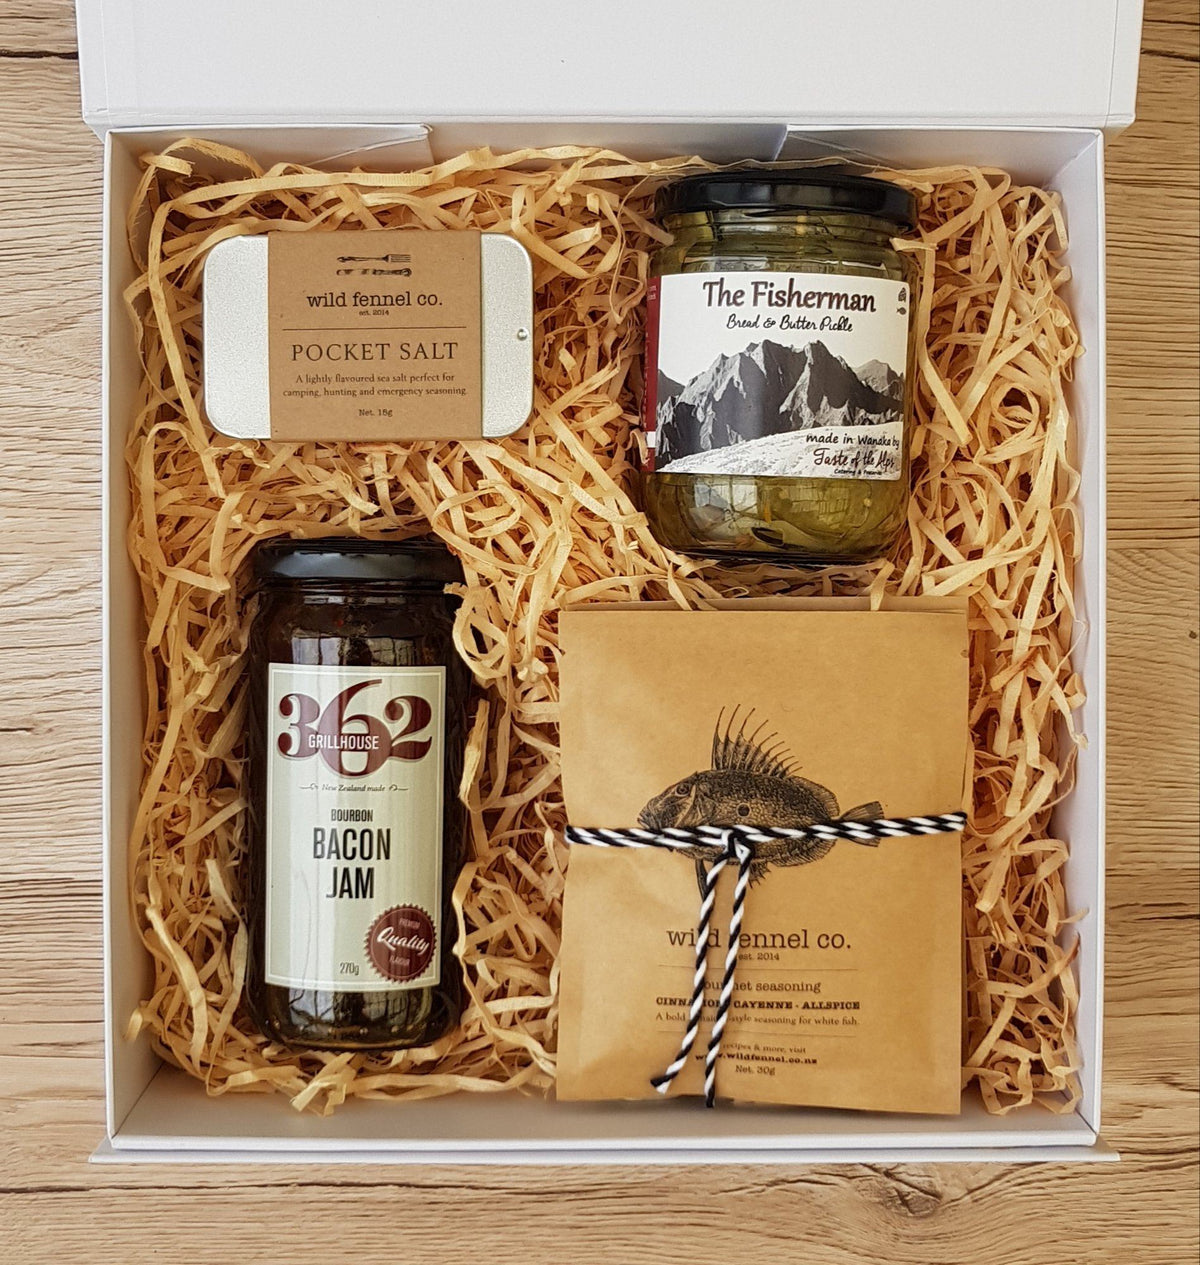 NZ Gift Box & NZ Gift Hampers - food gift box perfect for NZ corporate gifting. Easy NZ wide delivery of our online NZ gifts